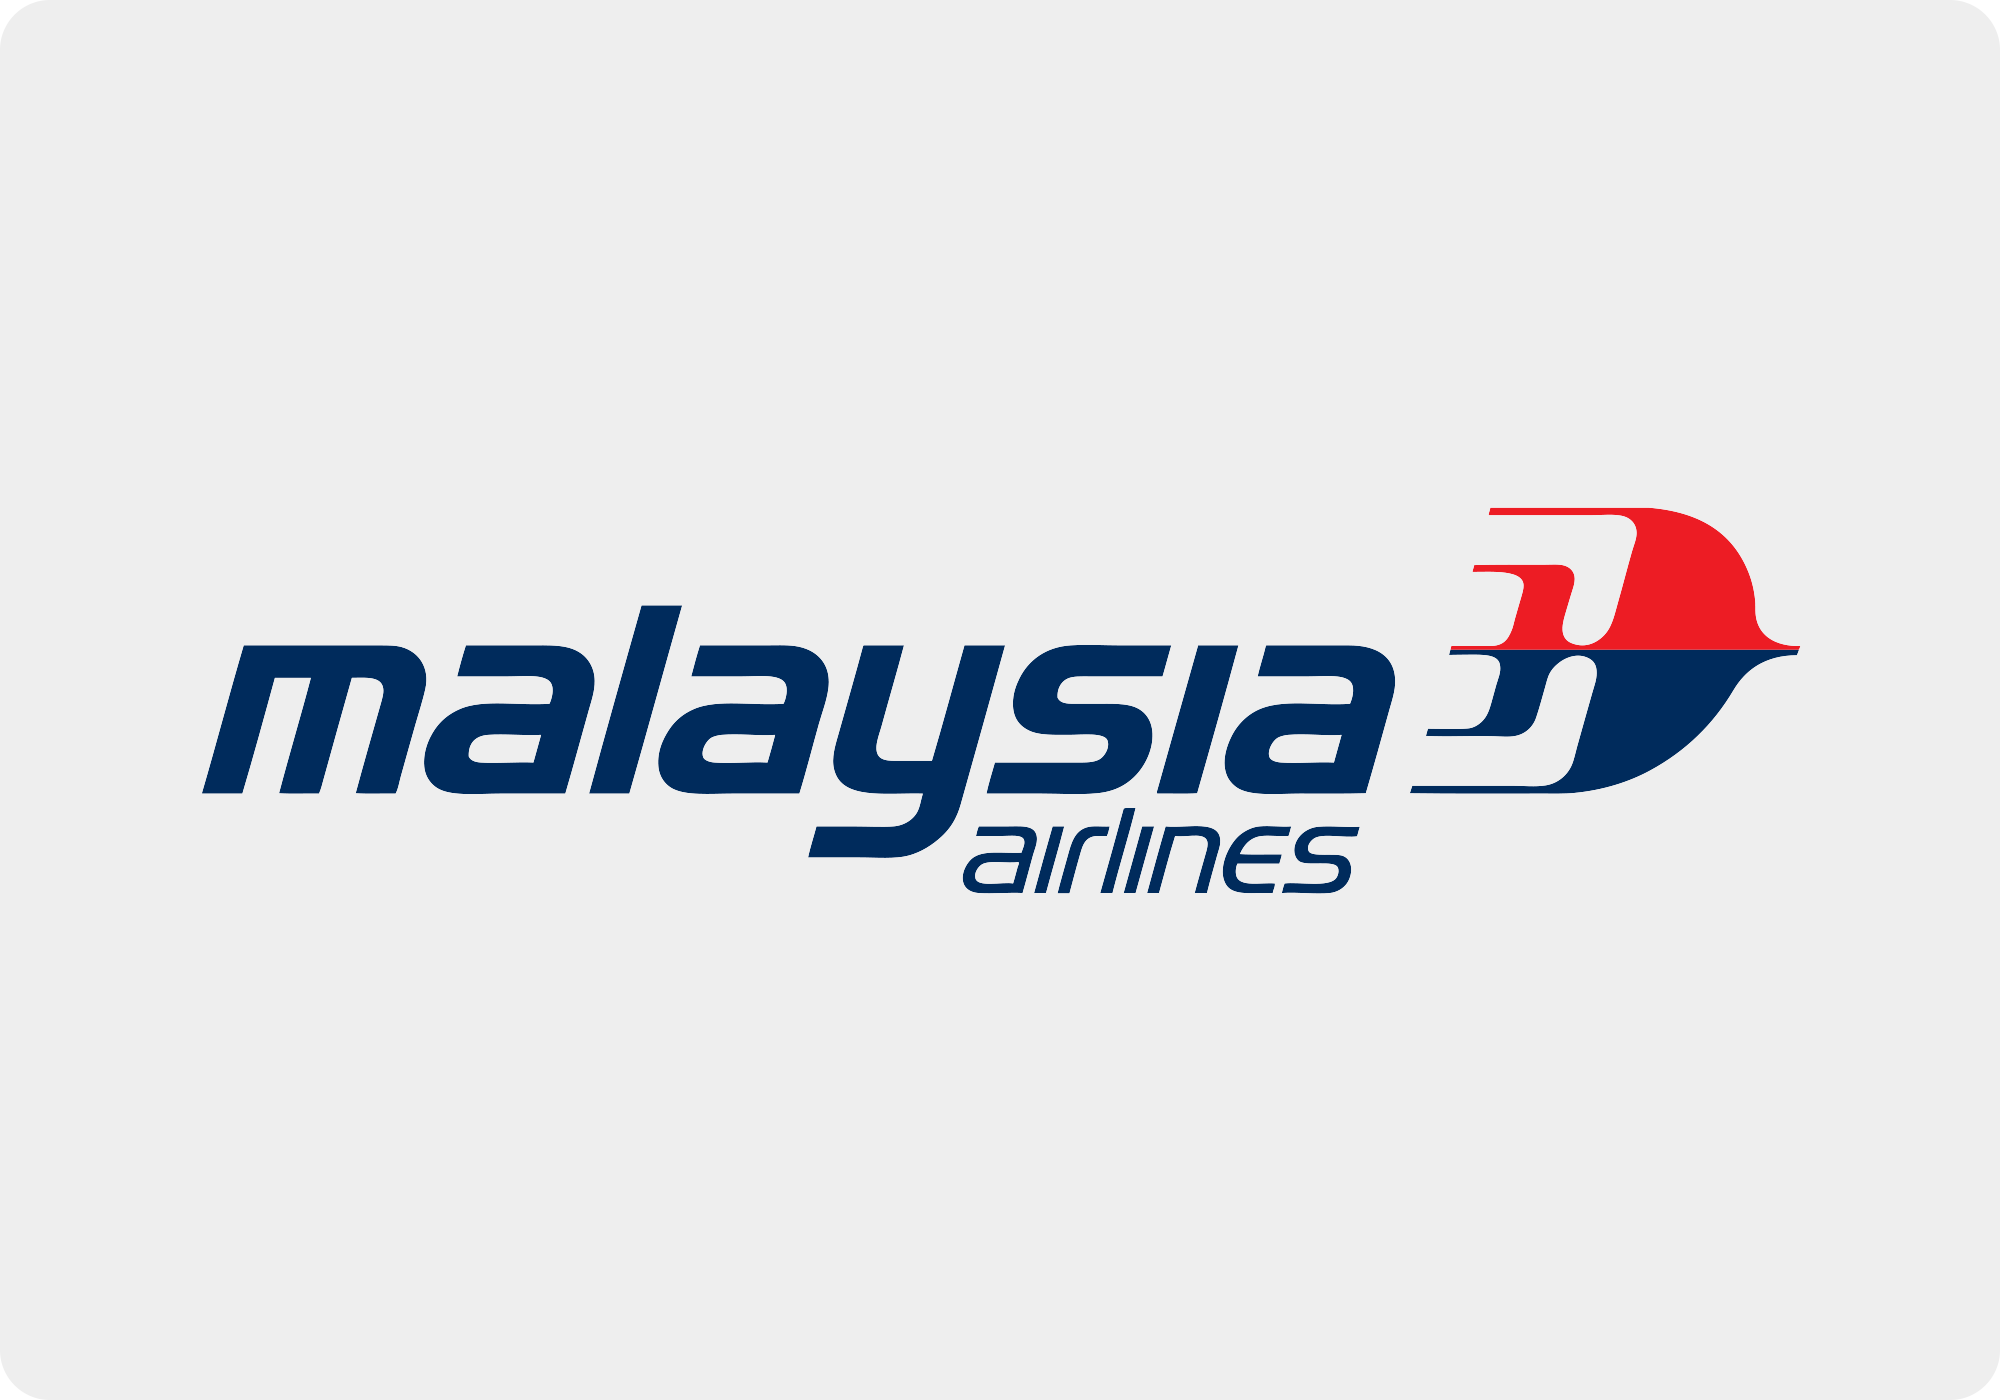 BARIN - Malaysia Airlines logo